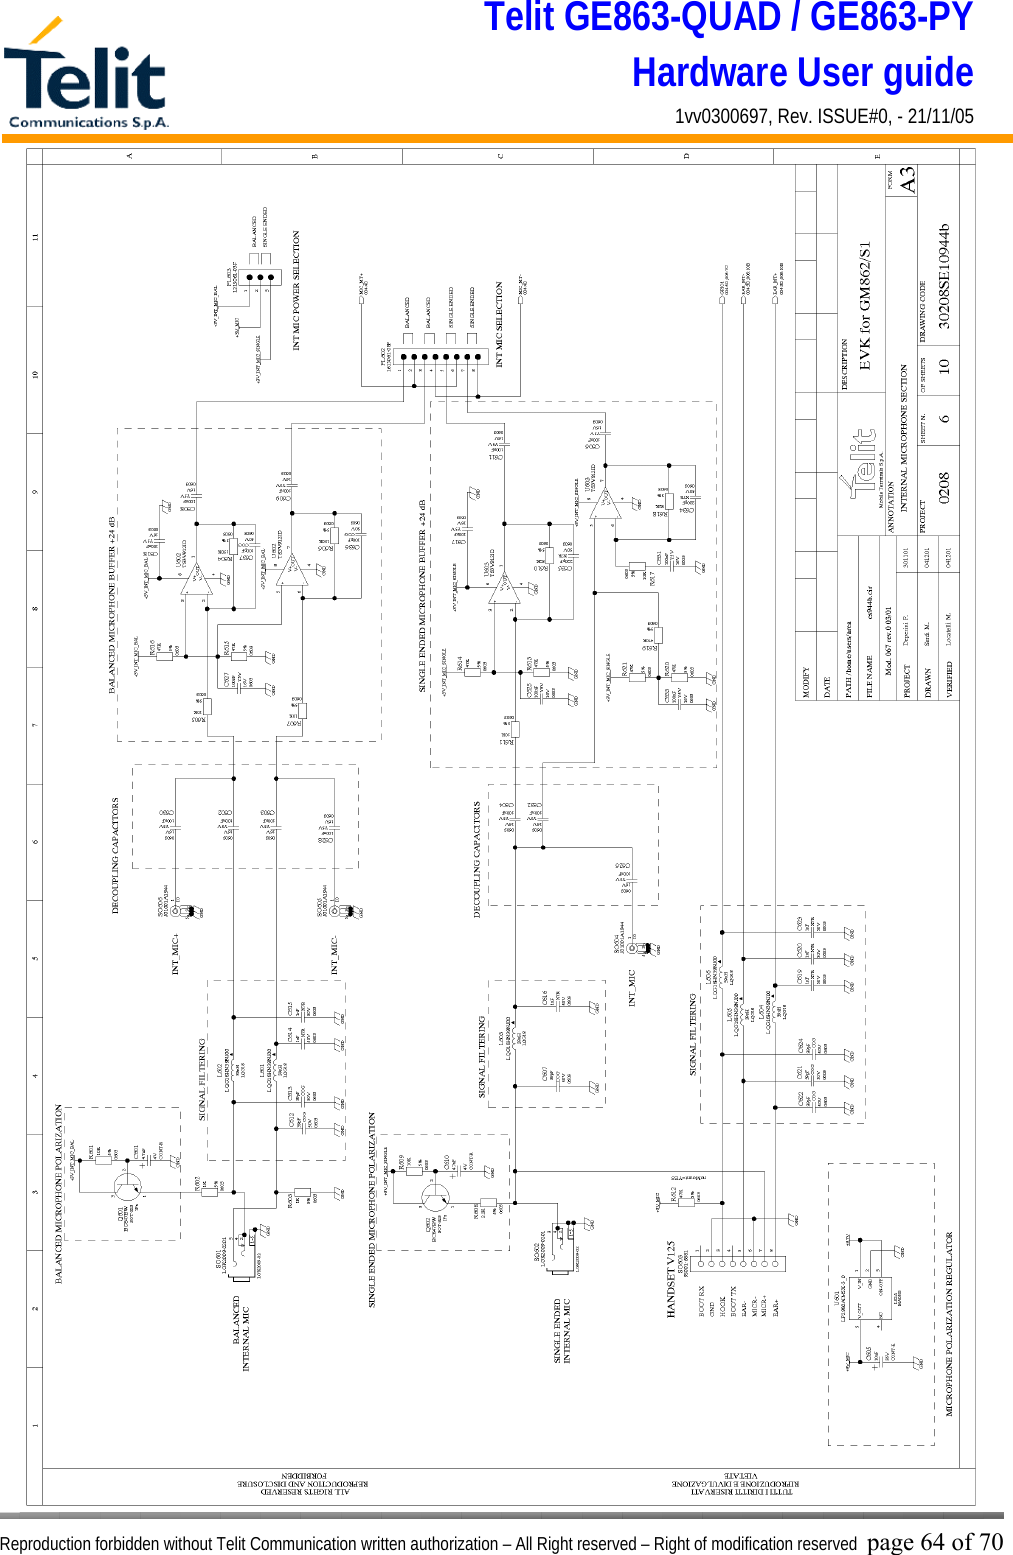 Telit GE863-QUAD / GE863-PY Hardware User guide 1vv0300697, Rev. ISSUE#0, - 21/11/05    Reproduction forbidden without Telit Communication written authorization – All Right reserved – Right of modification reserved page 64 of 70 